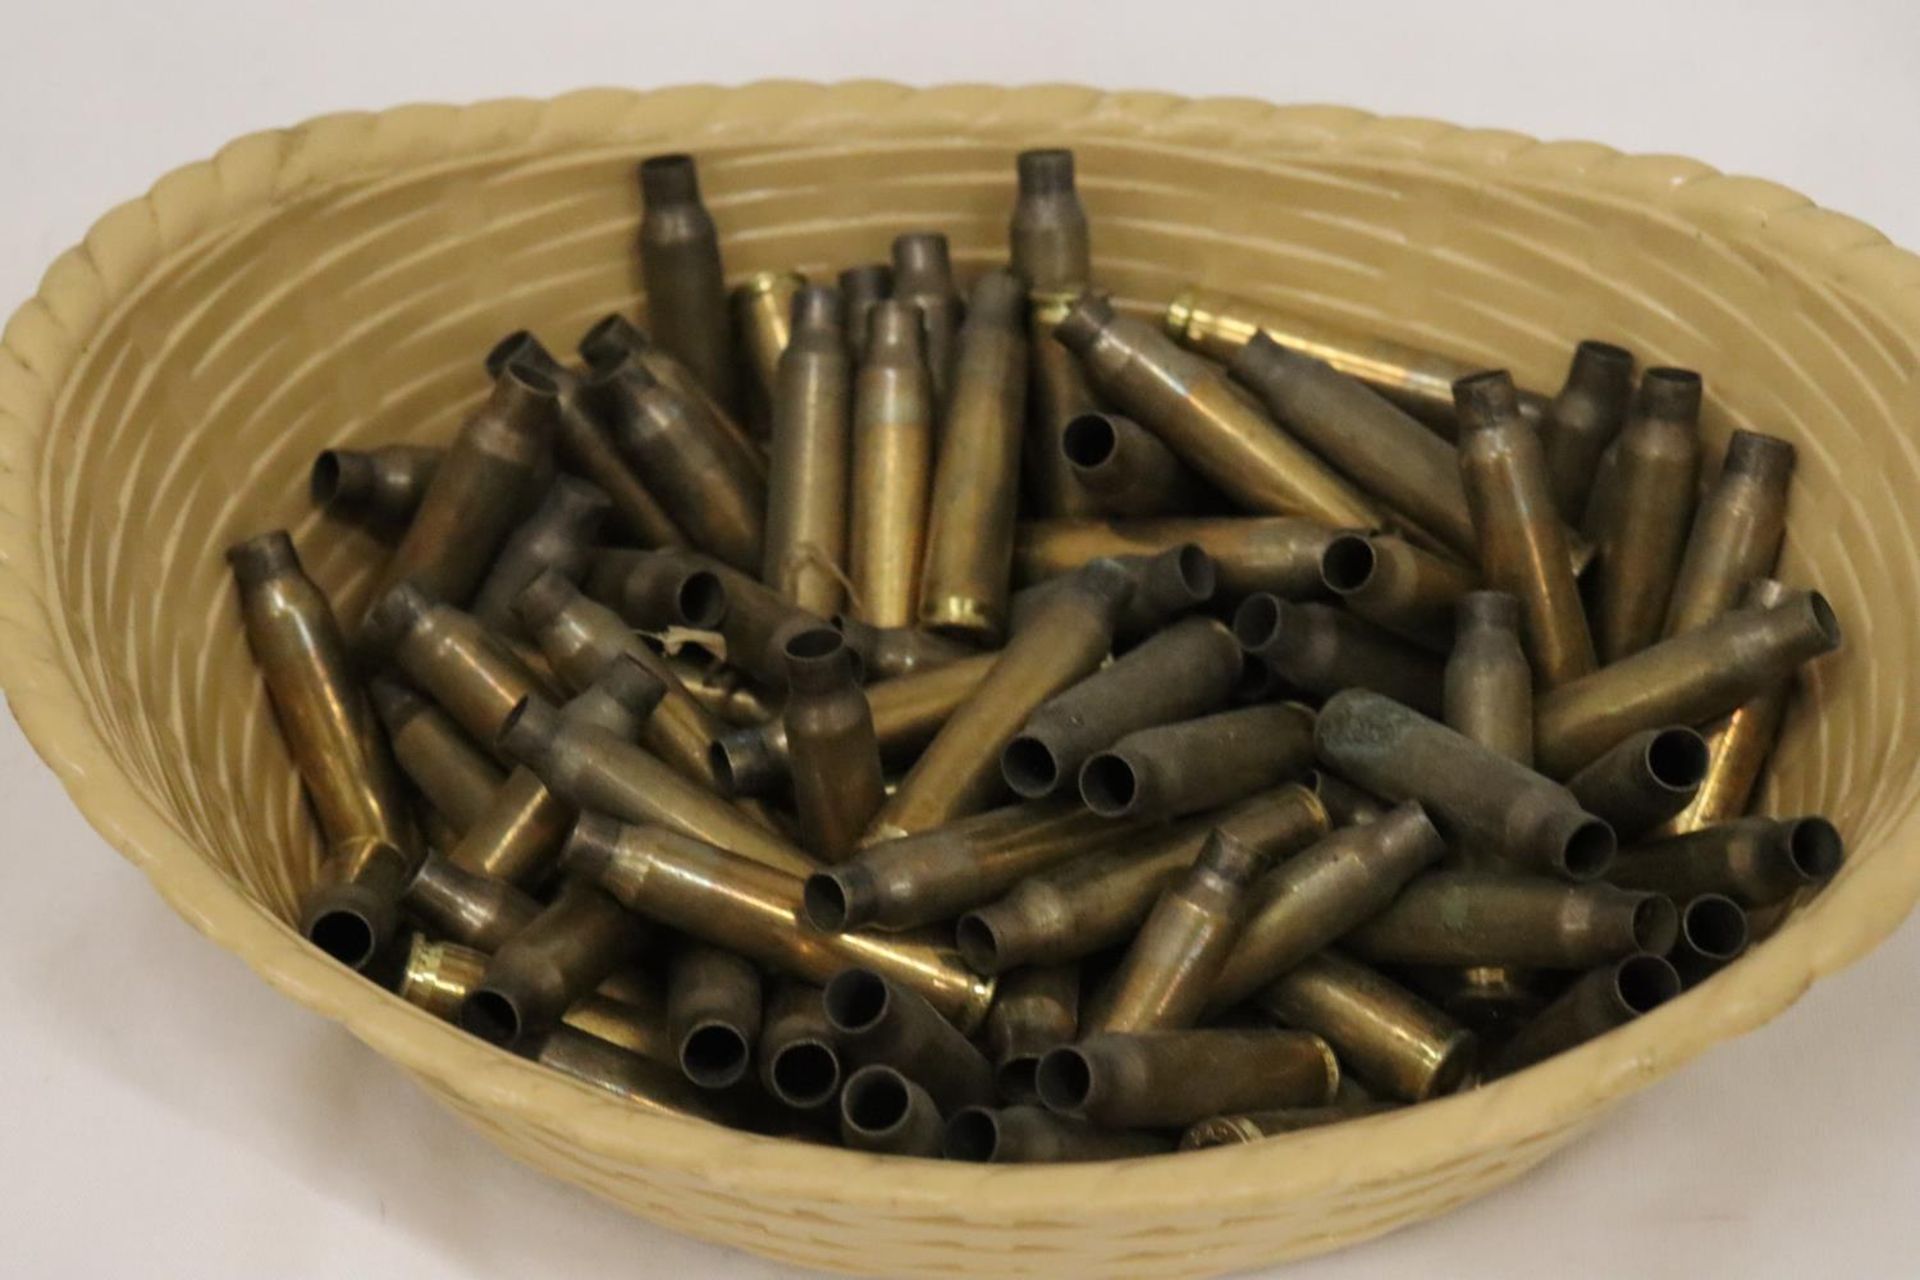 A QUANTITY OF BRASS USED BULLET CASINGS - Image 4 of 4